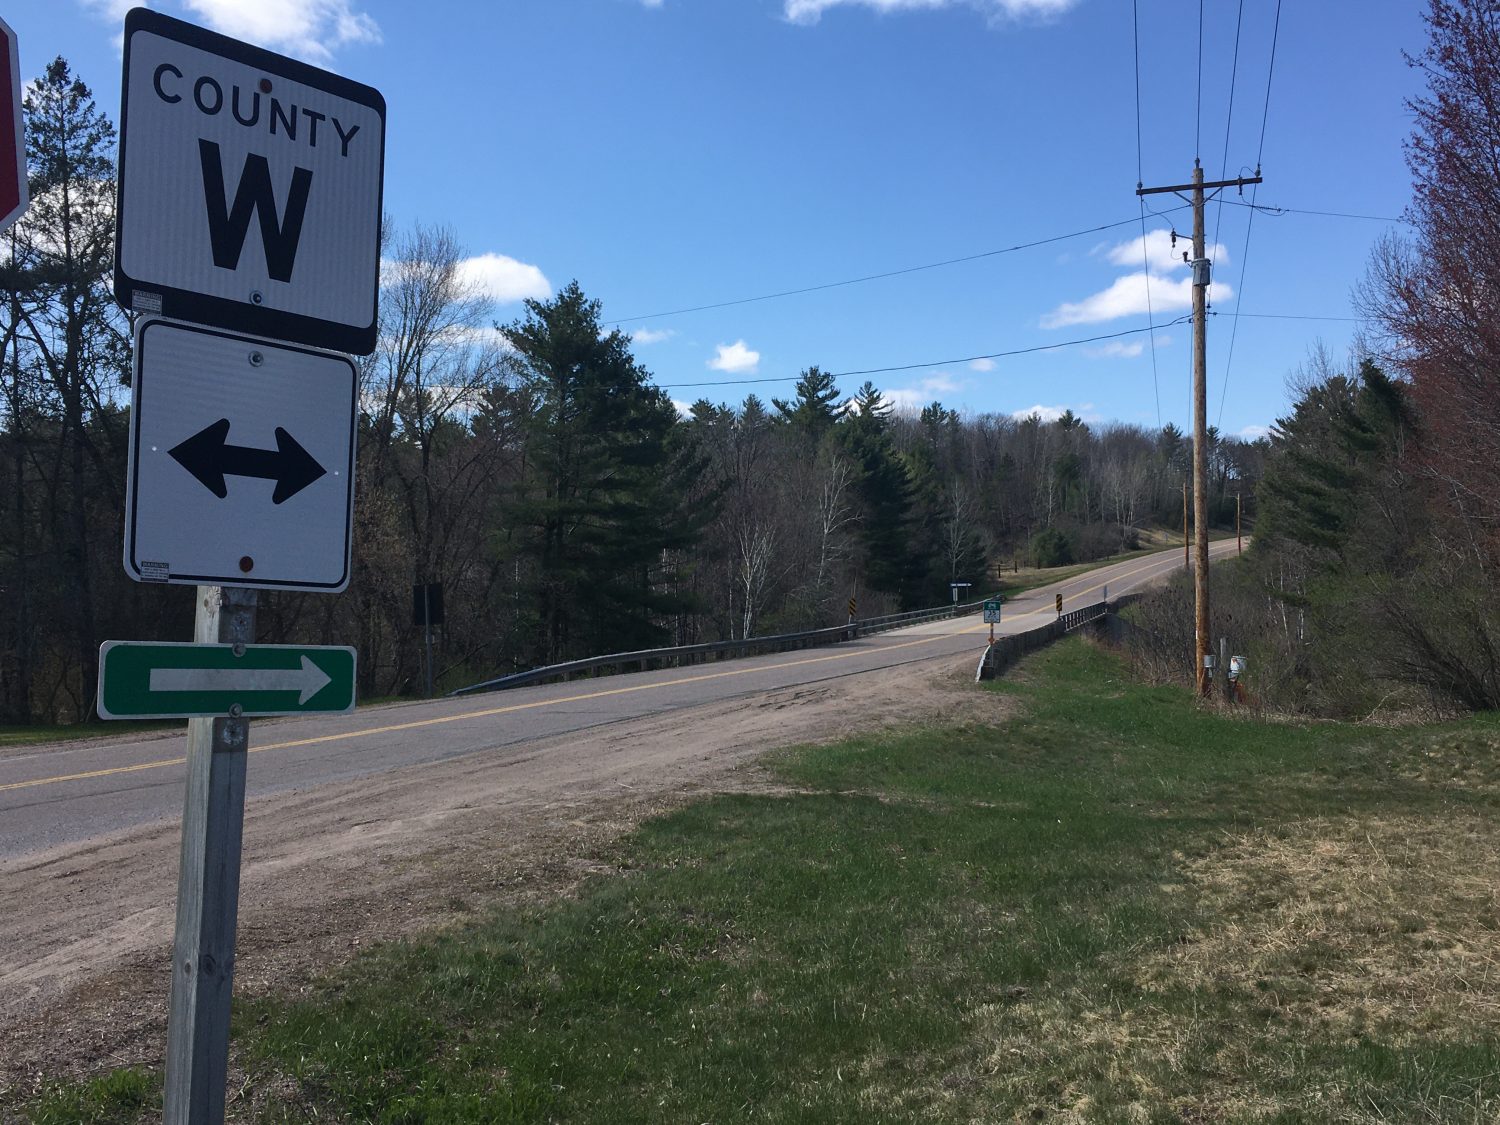 Lincoln County approves portion of County W for new ATV route